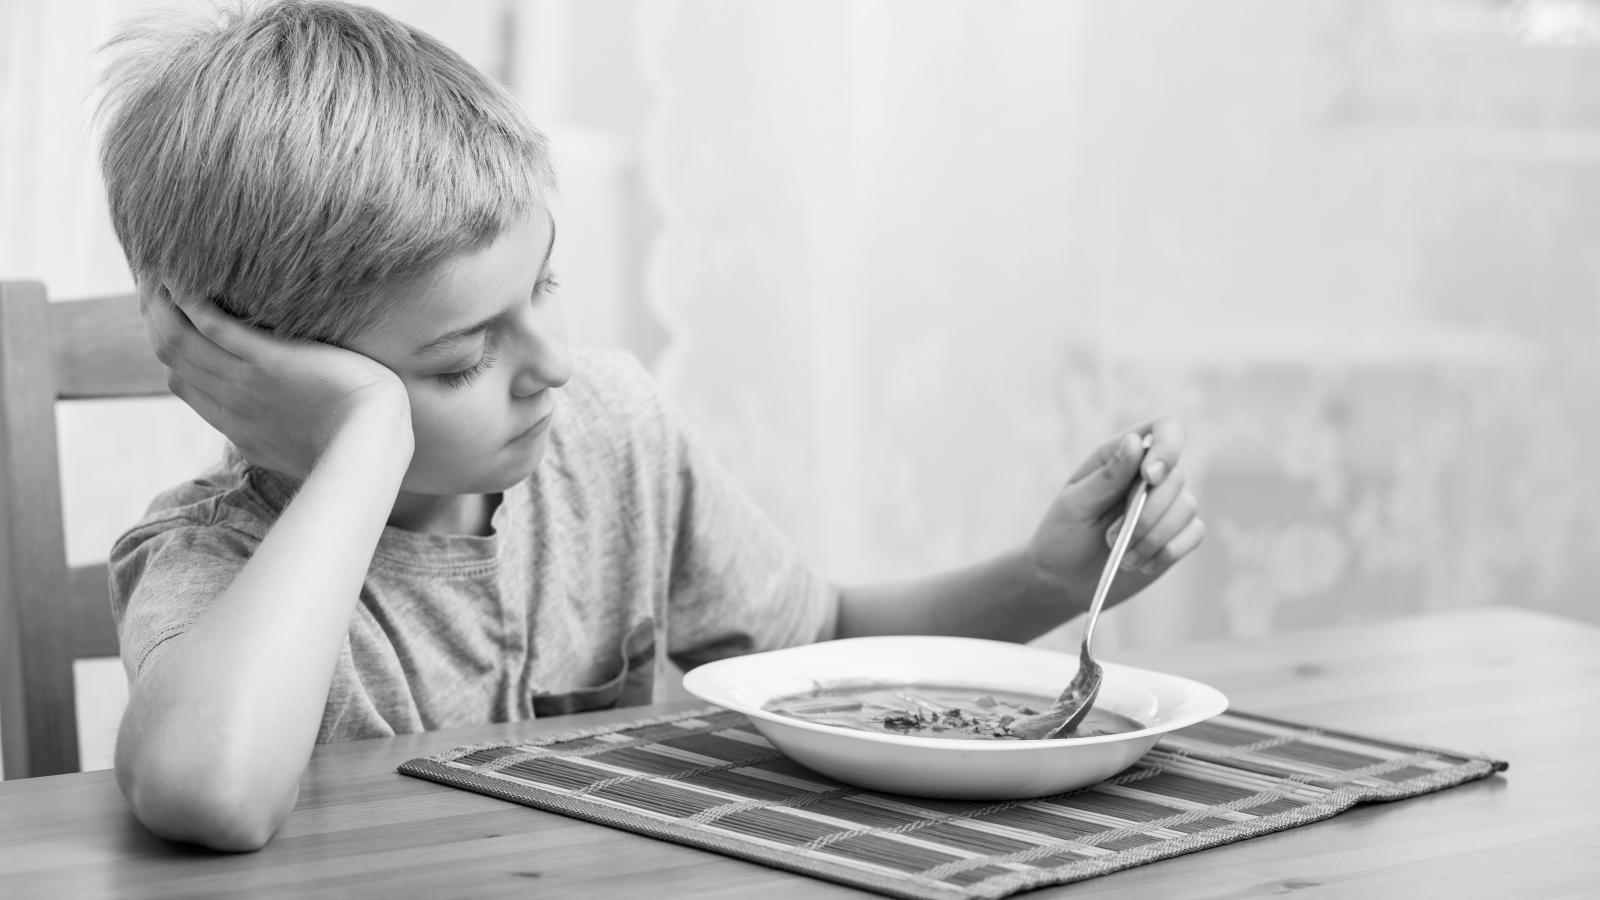 A boy with a bowl of soup looking sad